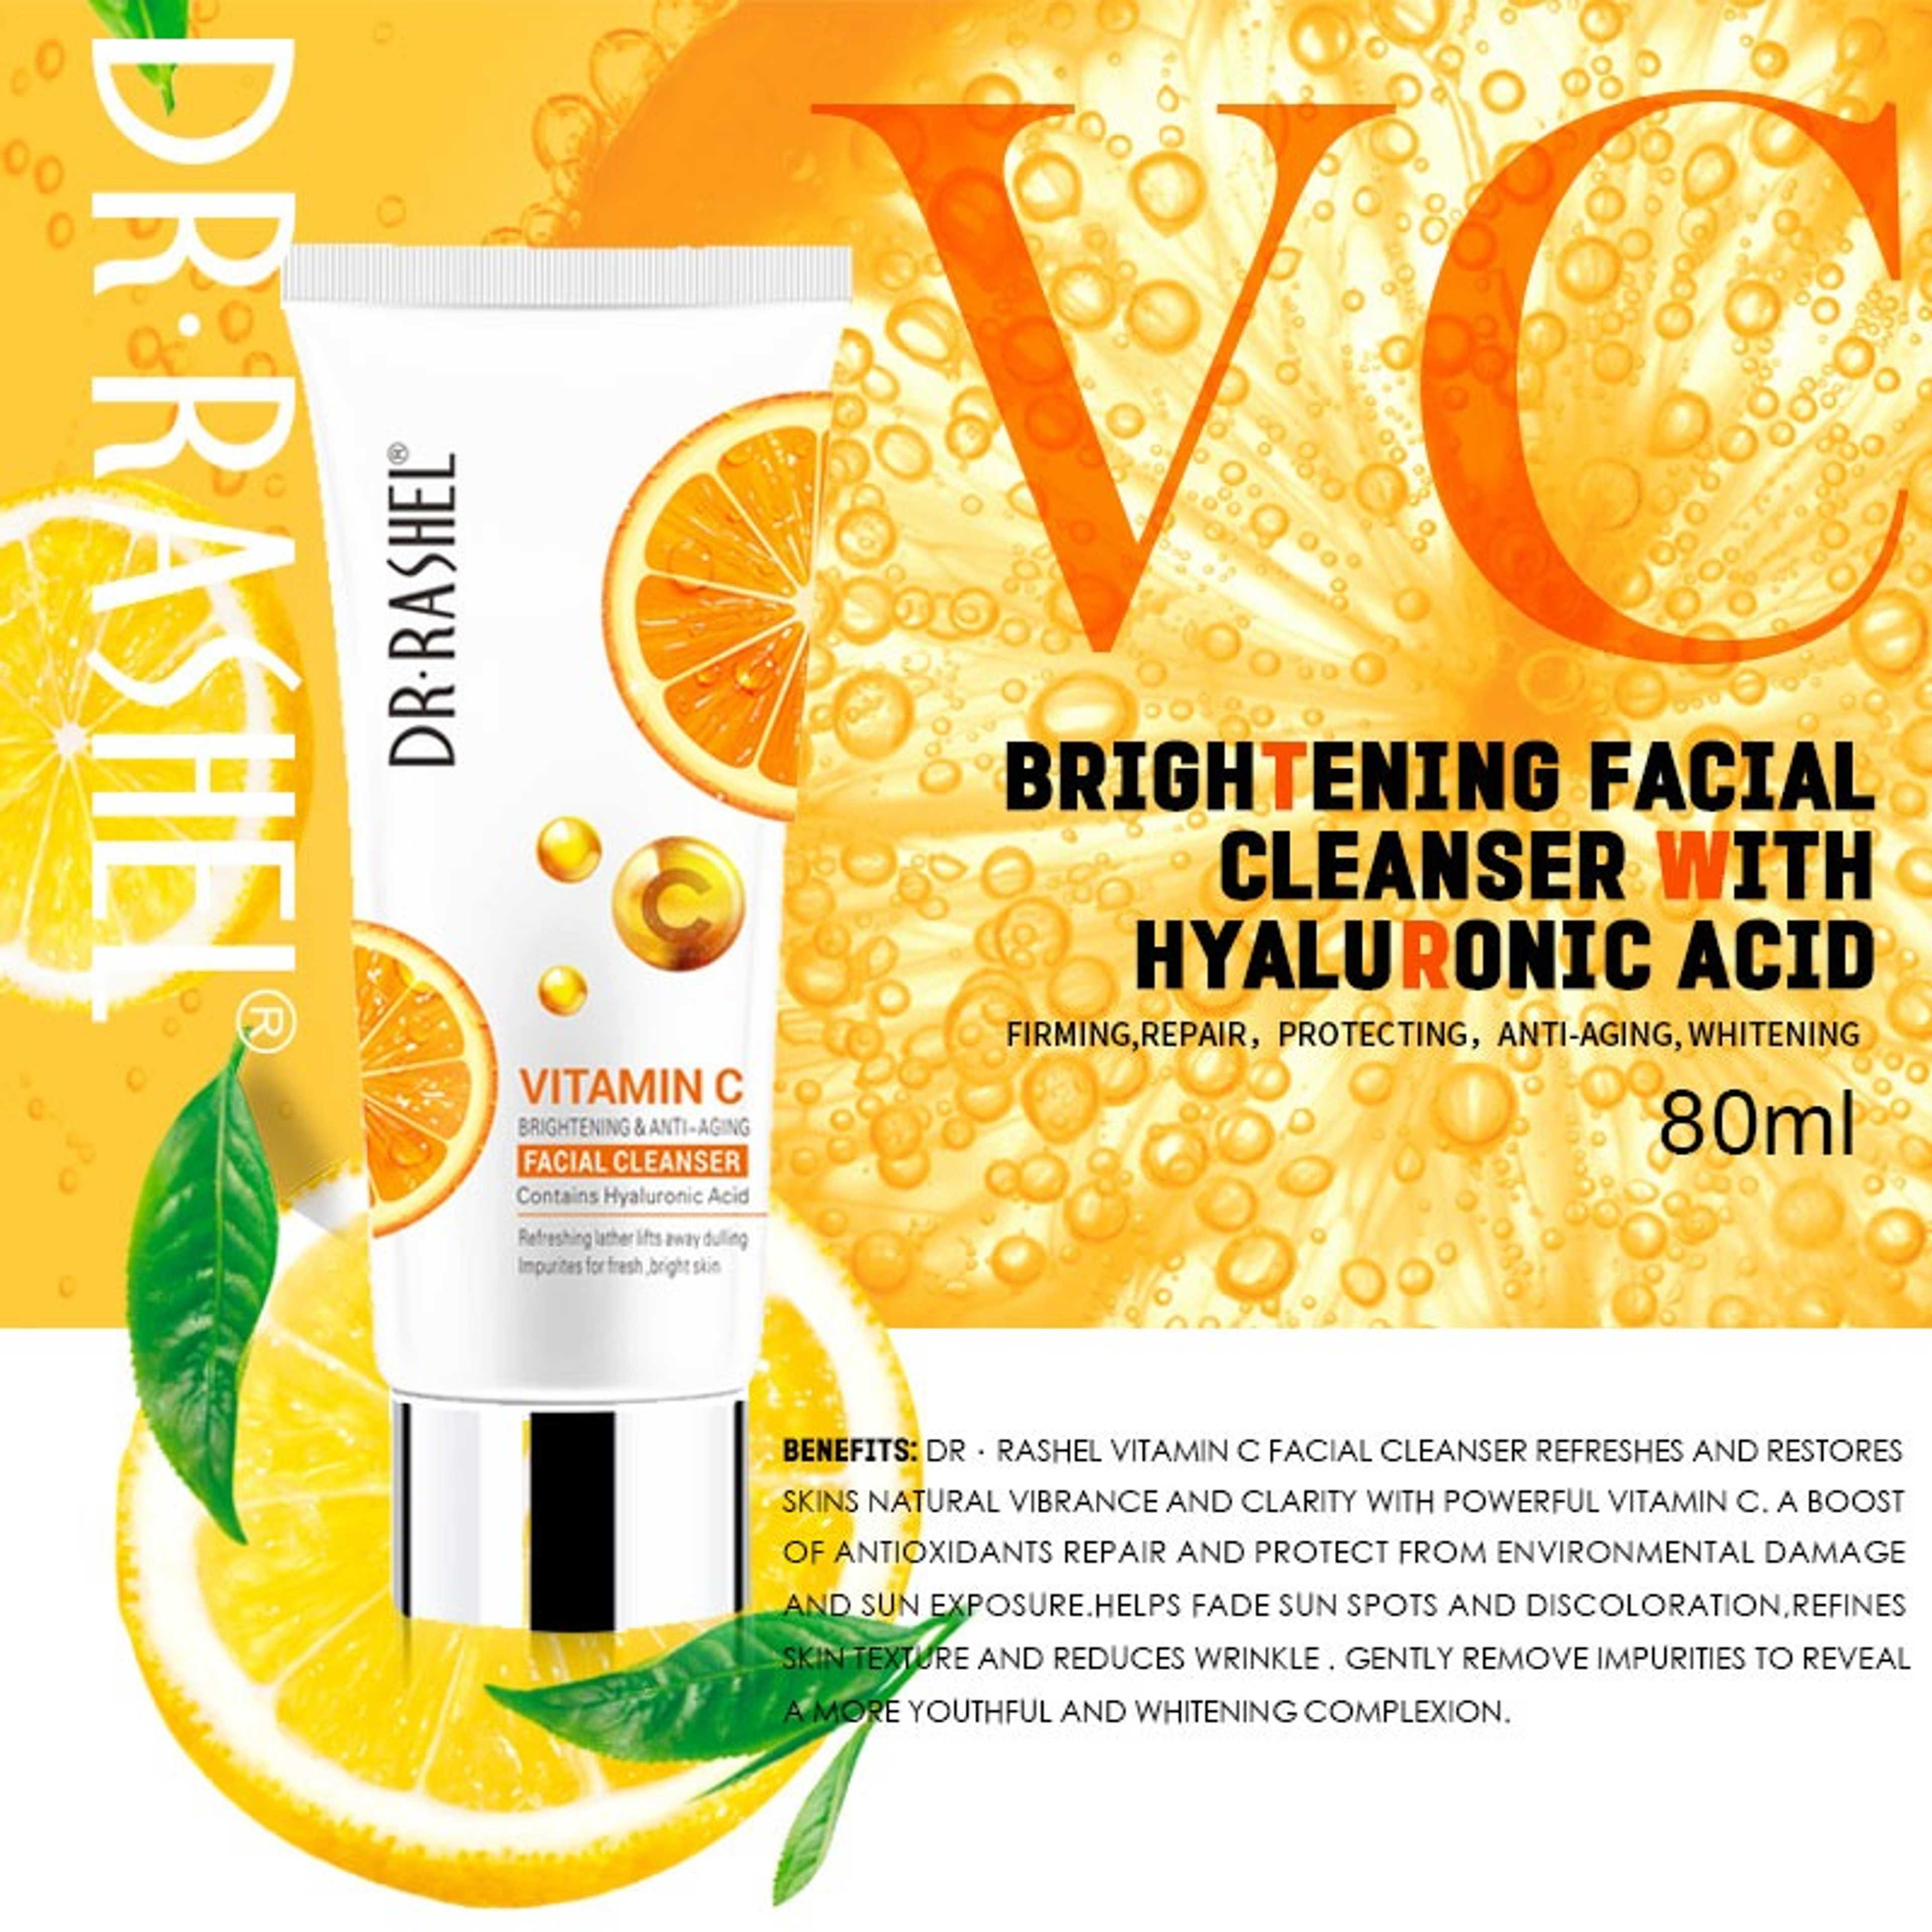 Dr Rashel Vitamin-C Brightening Facial Cleanser With Hyaluronic Acid - 80ml